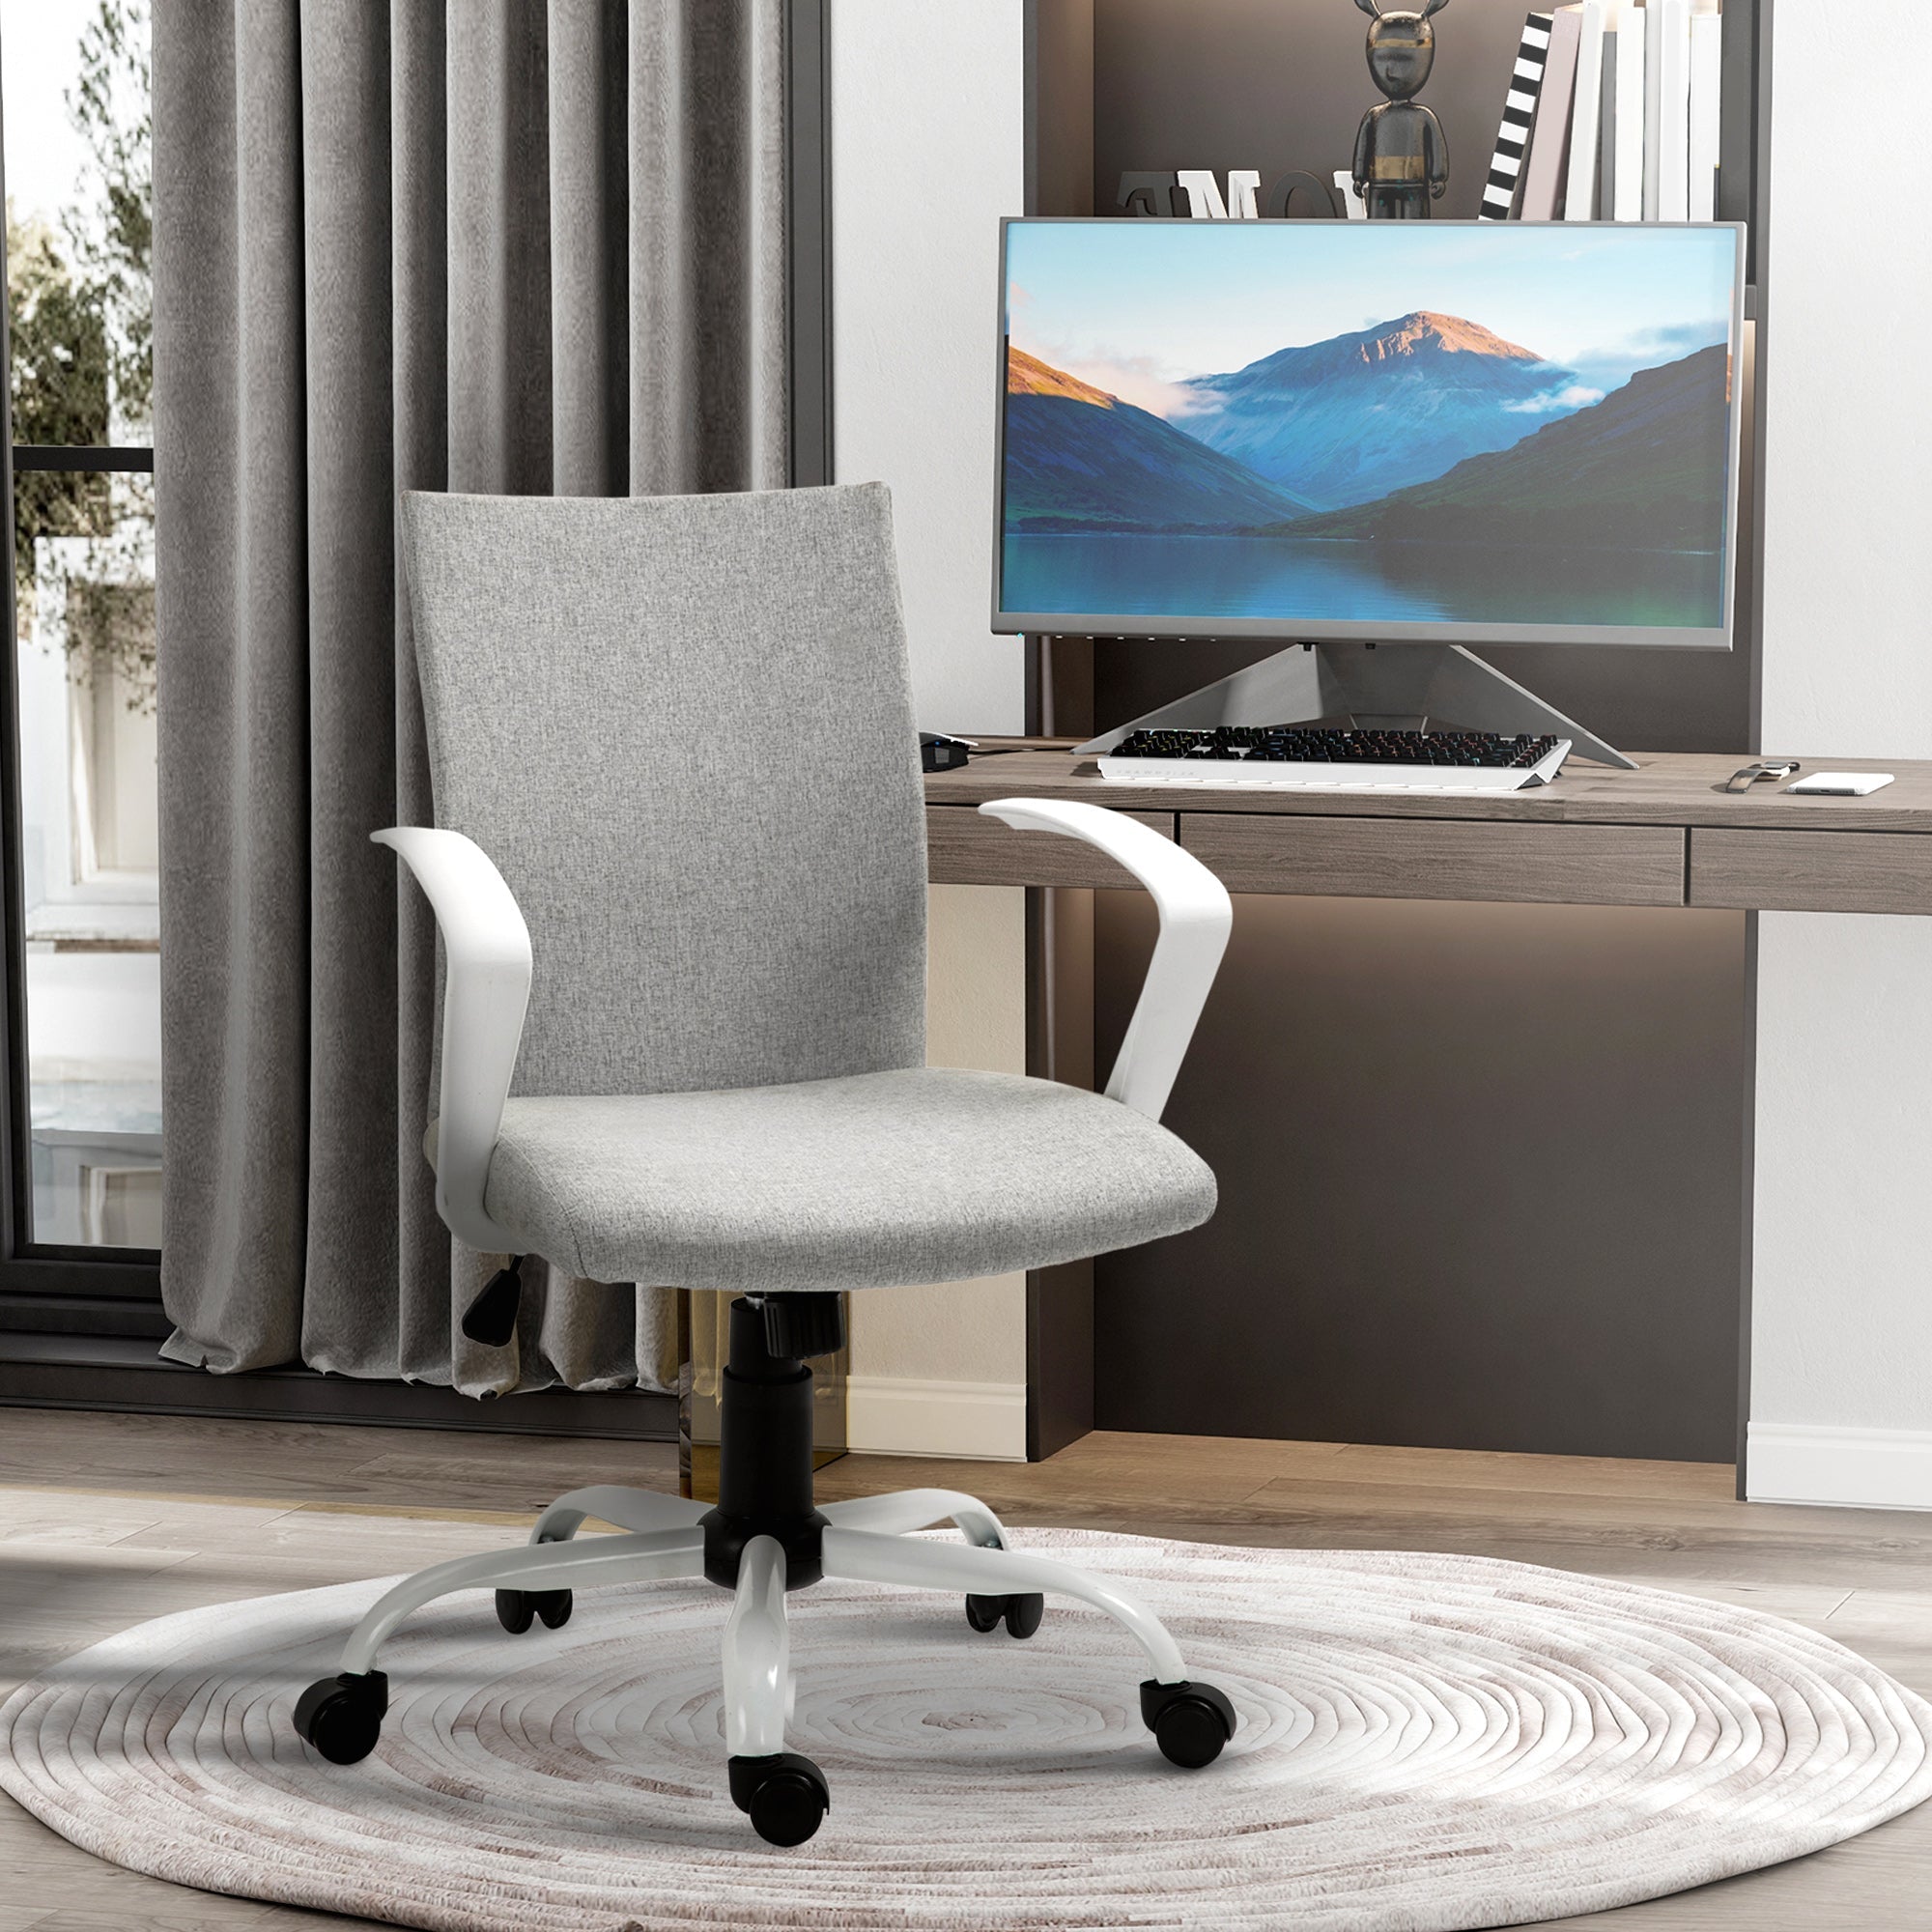 Mid Back Office Chair Linen Swivel Computer Study Chair Desk Chair with Wheels, Arm, Tilt Function, Light Grey - Gallery Canada